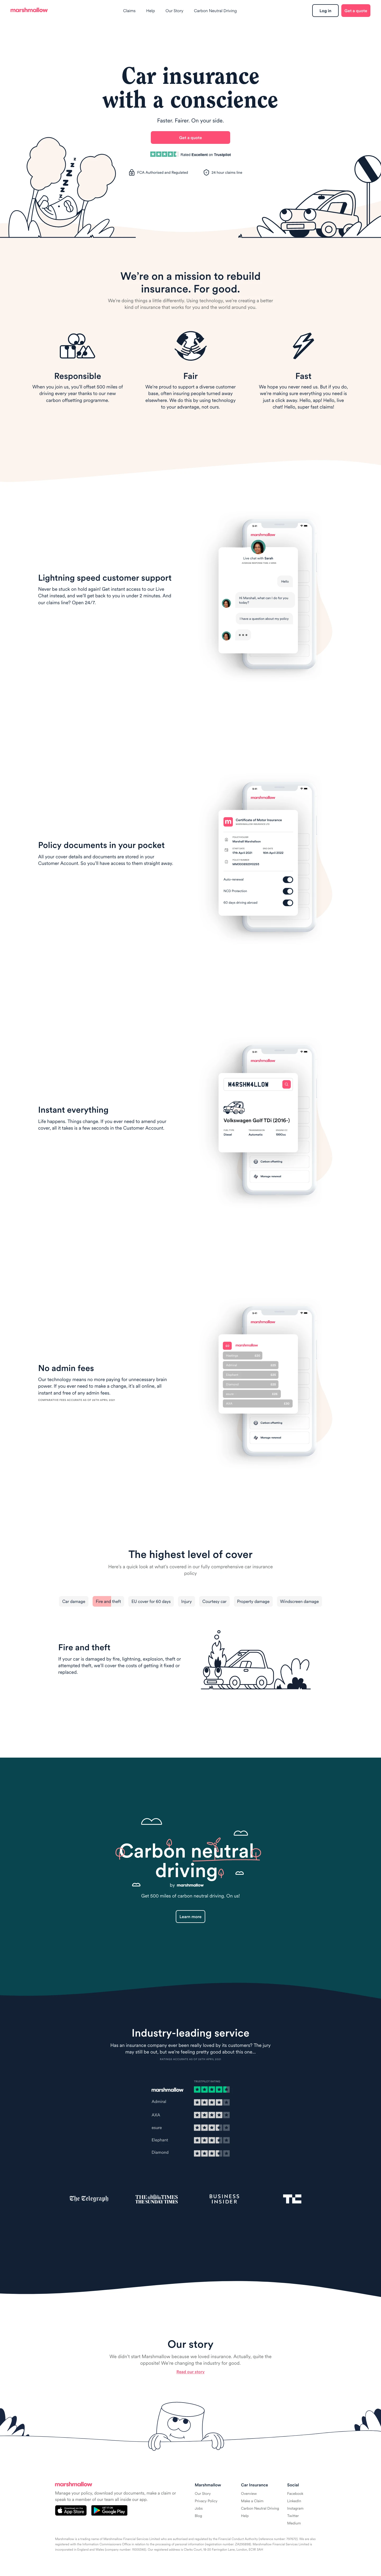 Marshmallow Landing Page Example: Digital-first car insurance company with a mission to deliver great prices, service, and coverage.